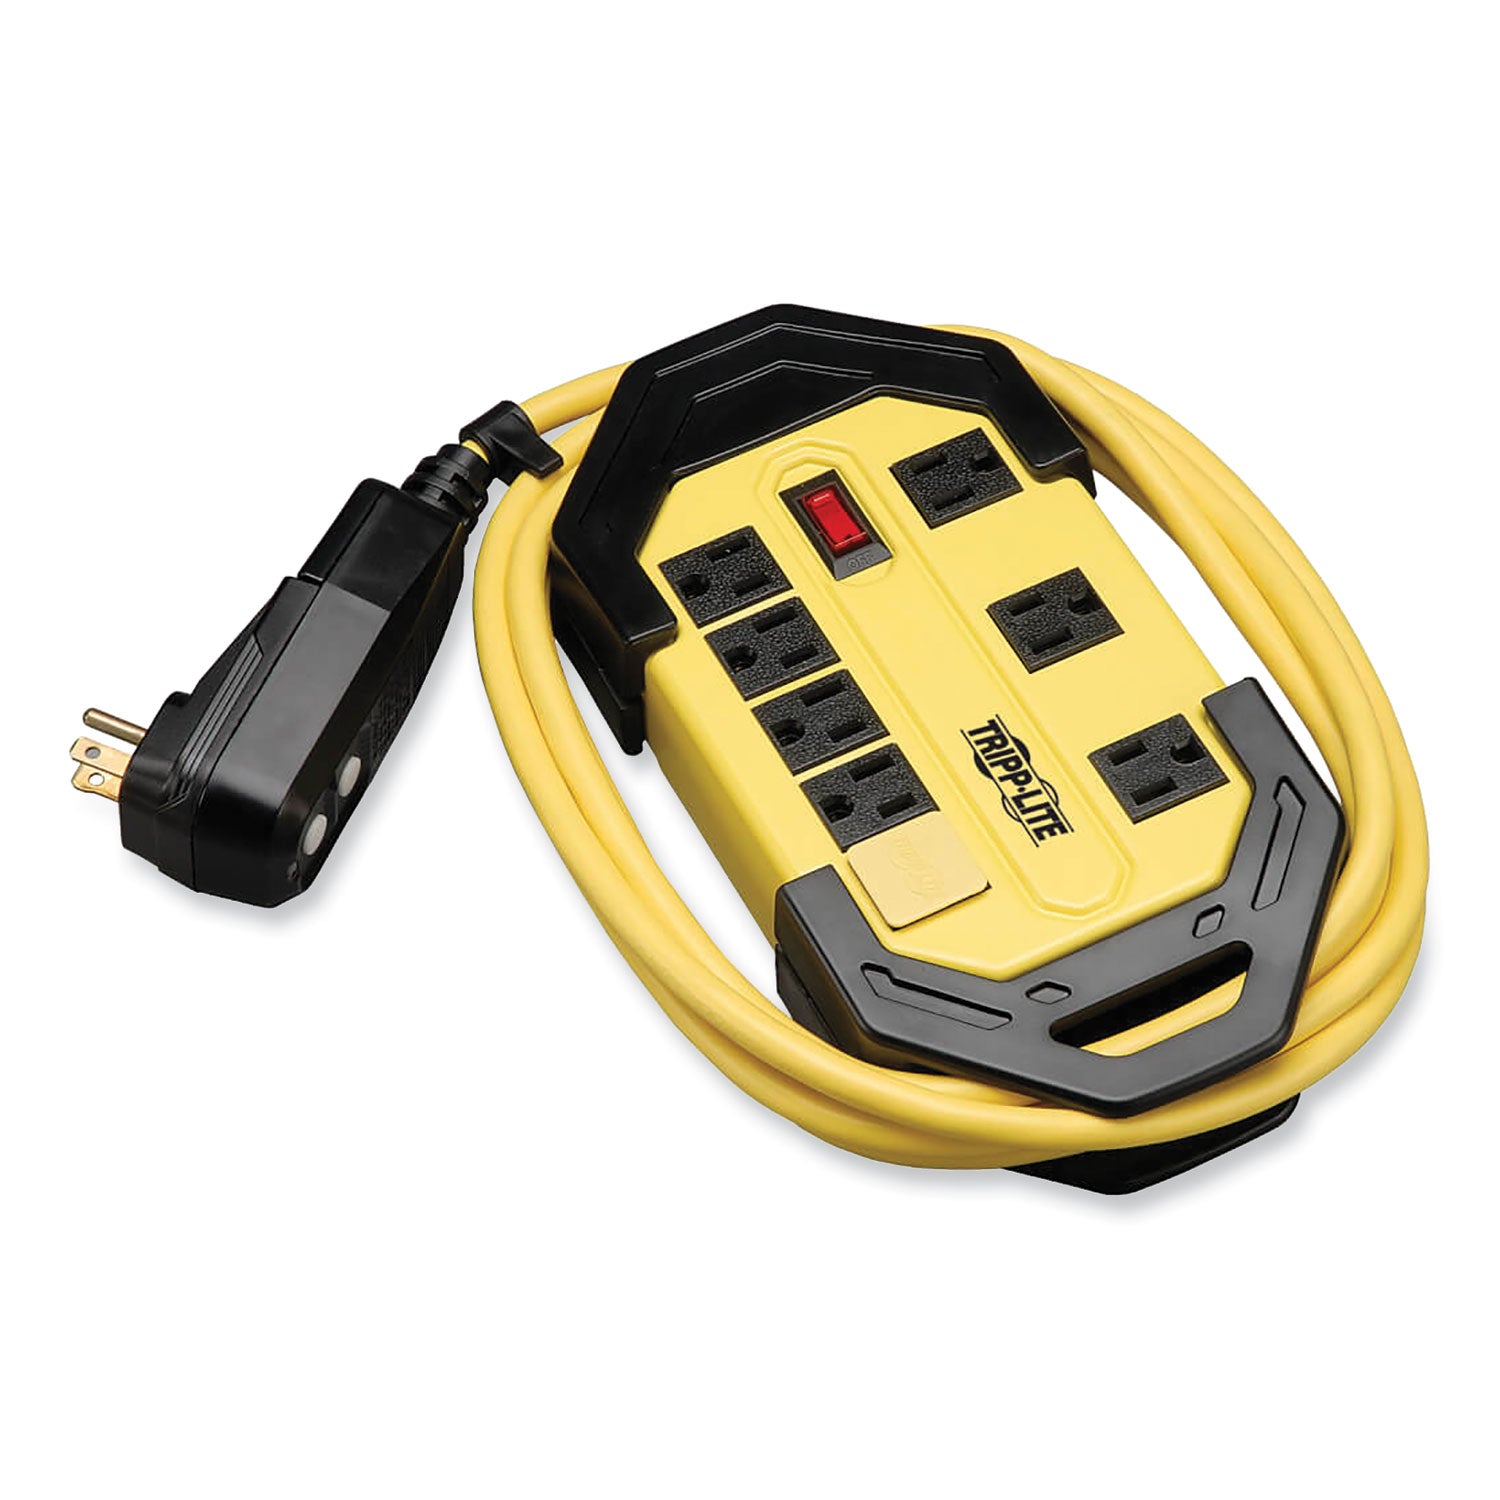 Power It! Safety Power Strip with GFCI Plug, 8 Outlets, 12 ft Cord, Yellow/Black - 